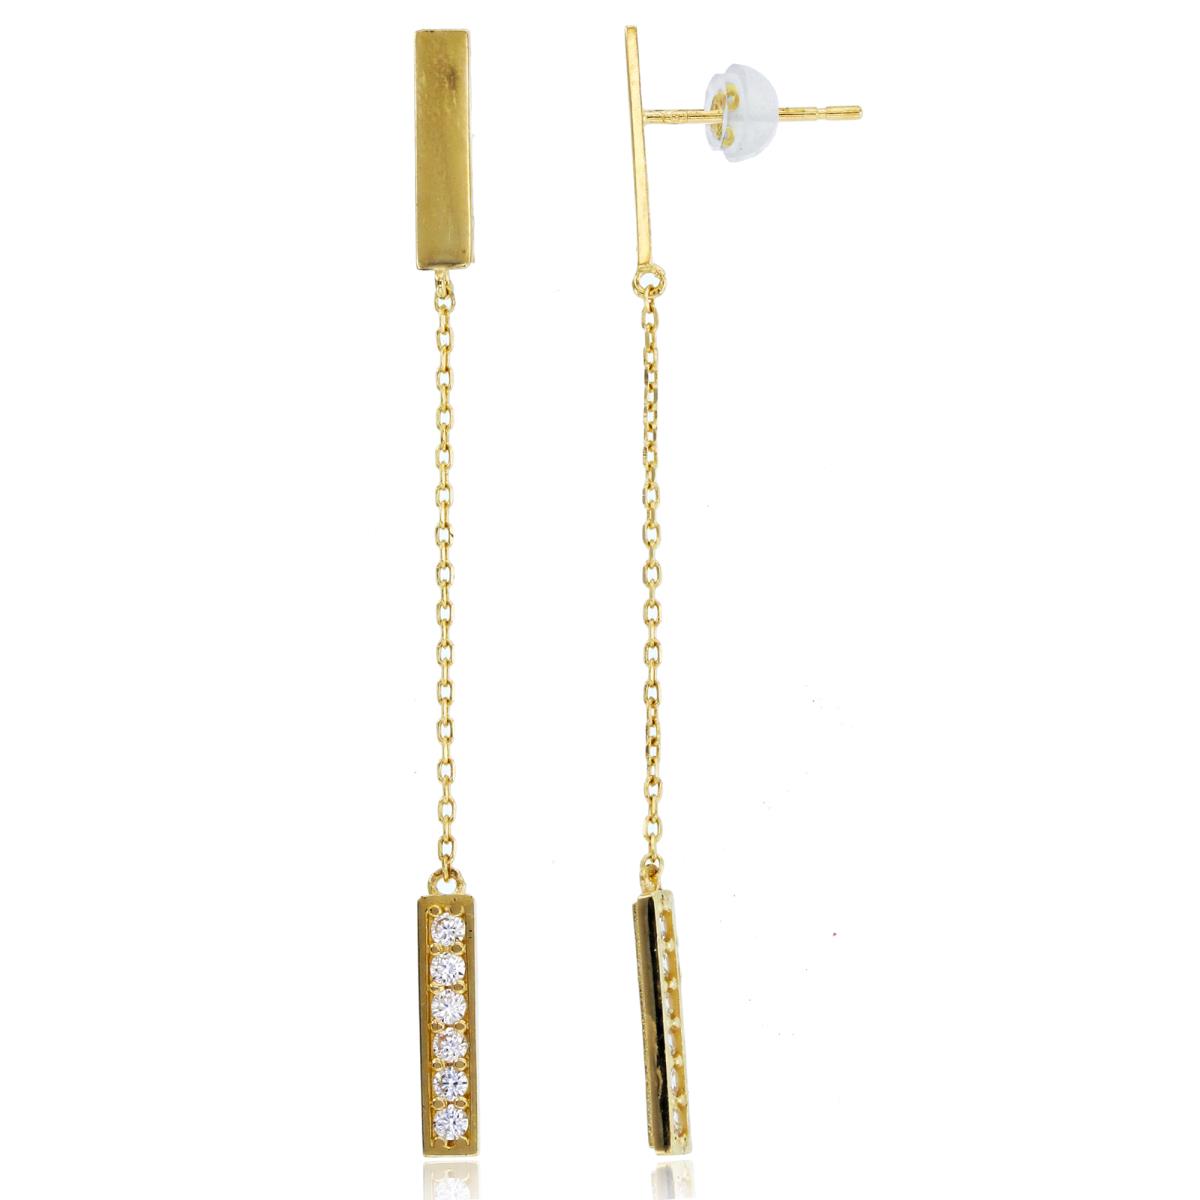 10K Yellow Gold High Polished Top & Rnd CZ Bottom Bar Dangling Chain Earrings with Silicone Backs